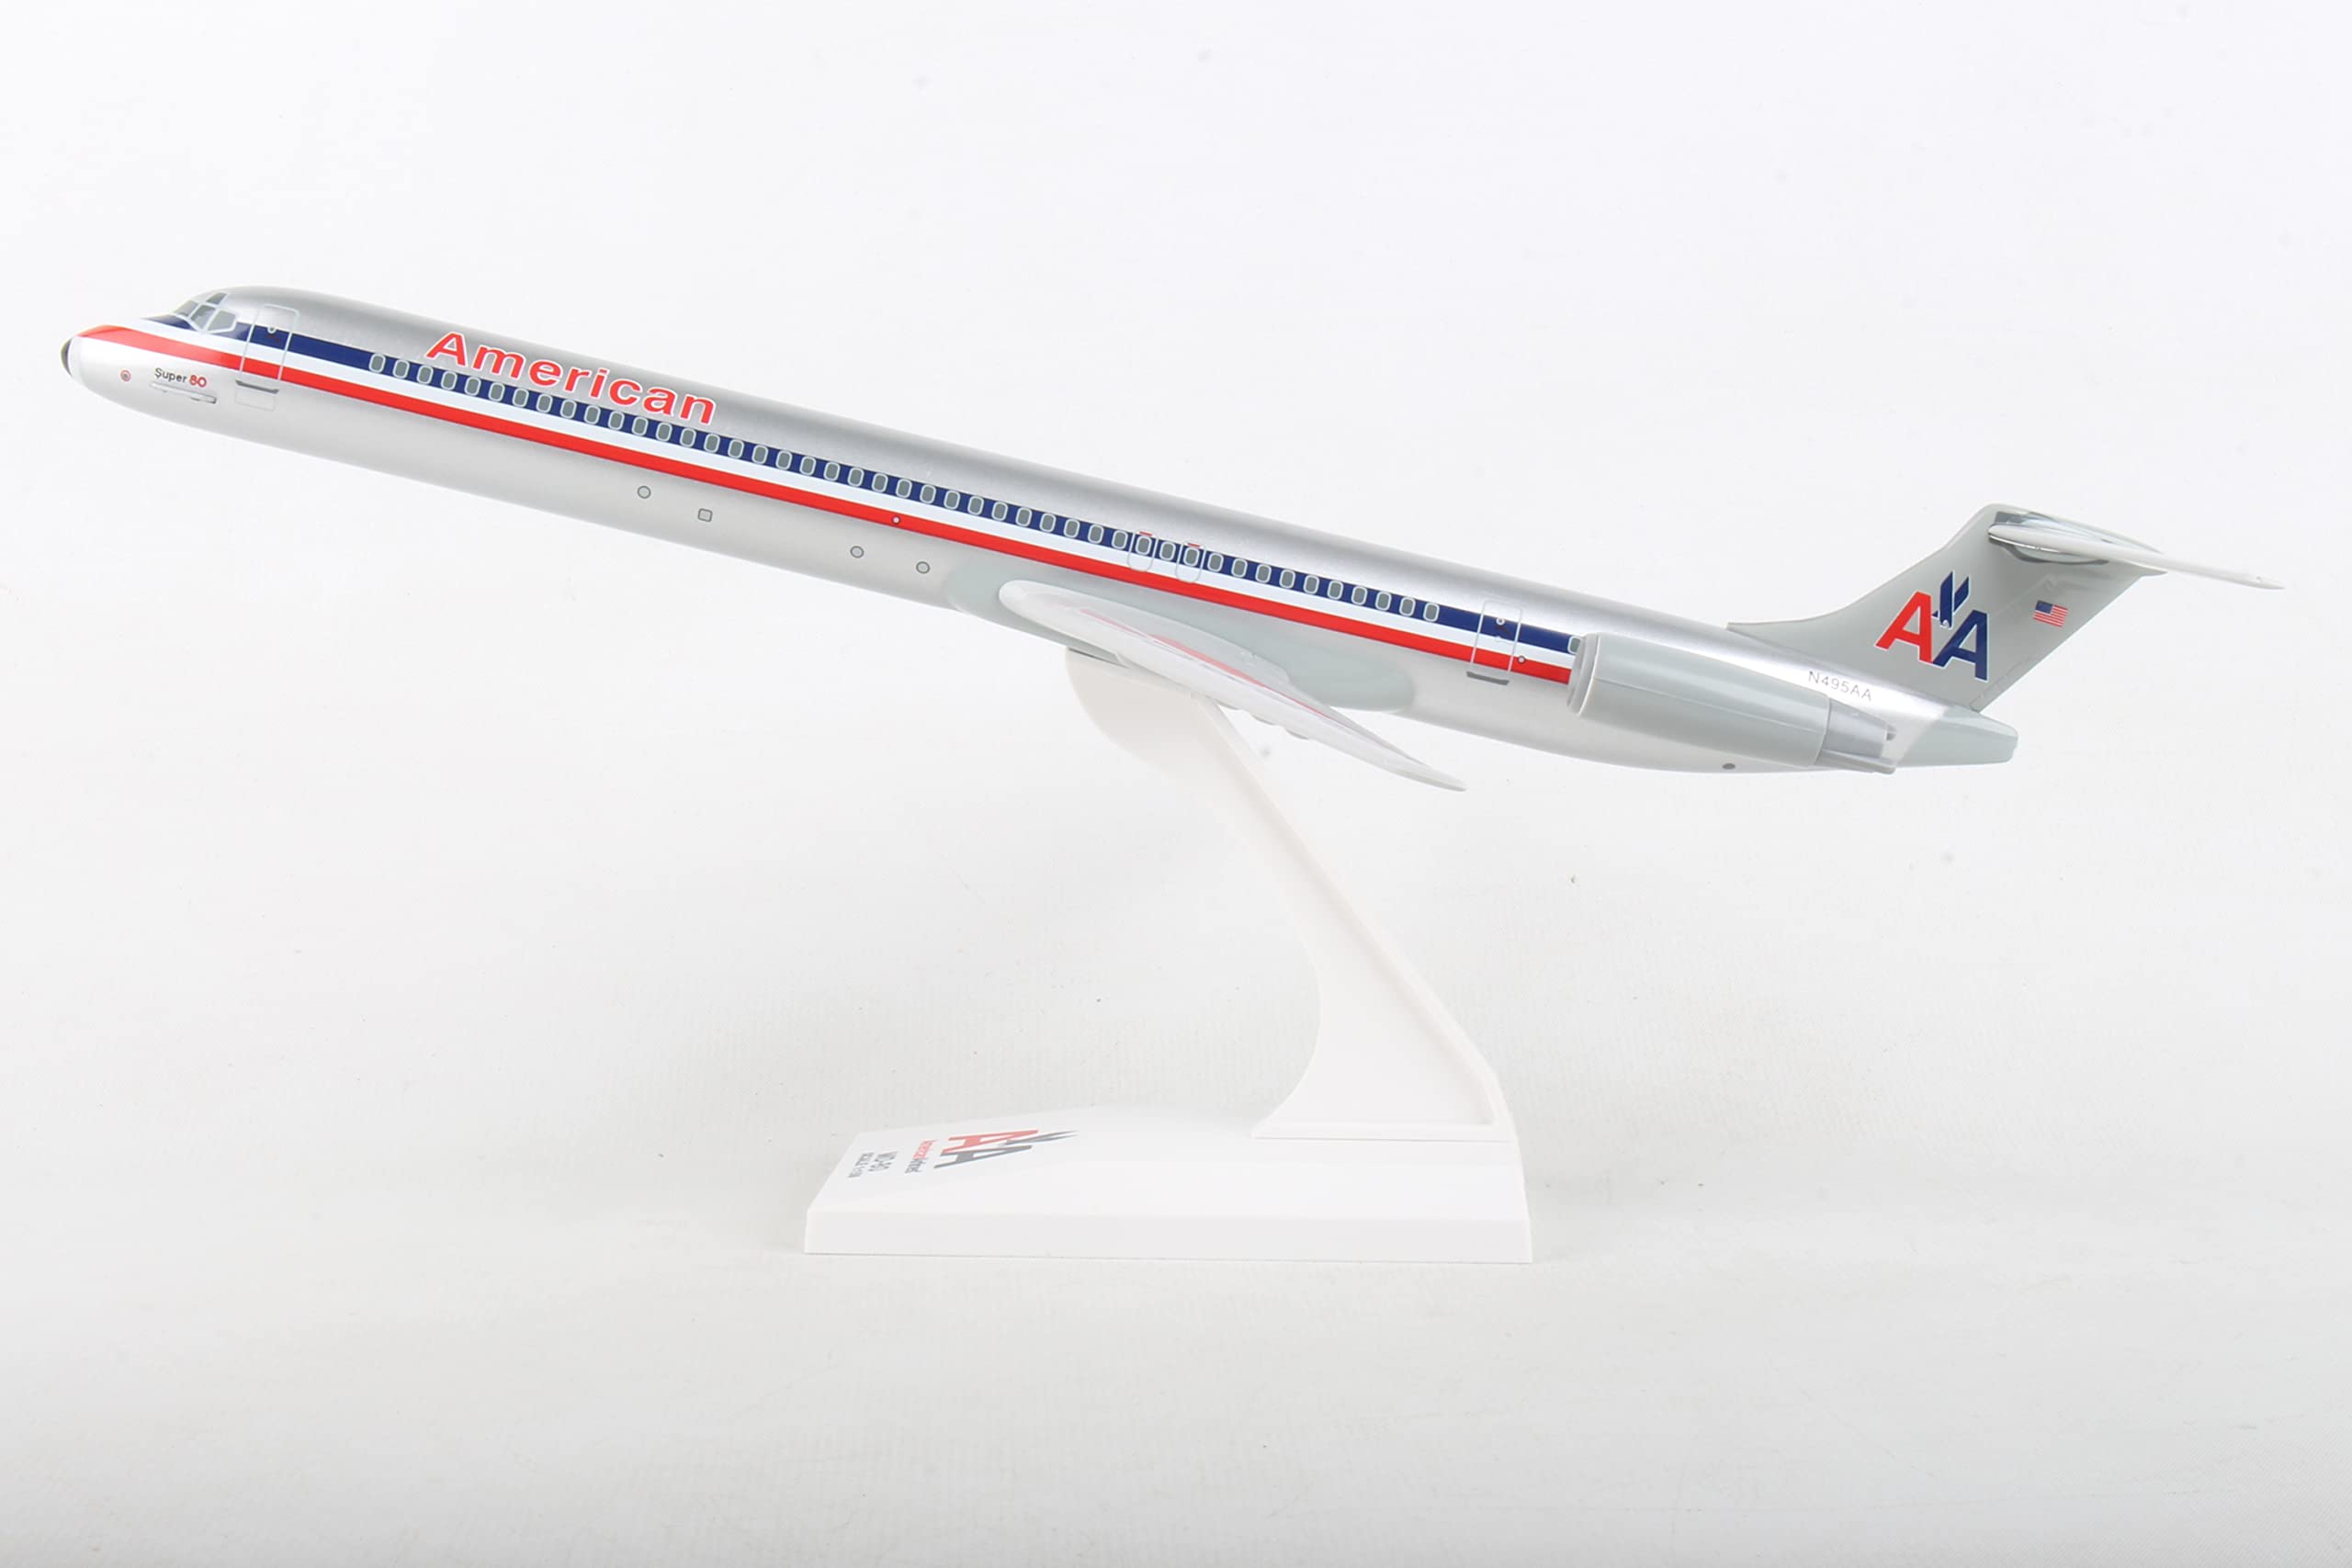 Daron Skymarks American Airlines MD-80 Old Livery Airplane Model Building Kit 1/150-Scale